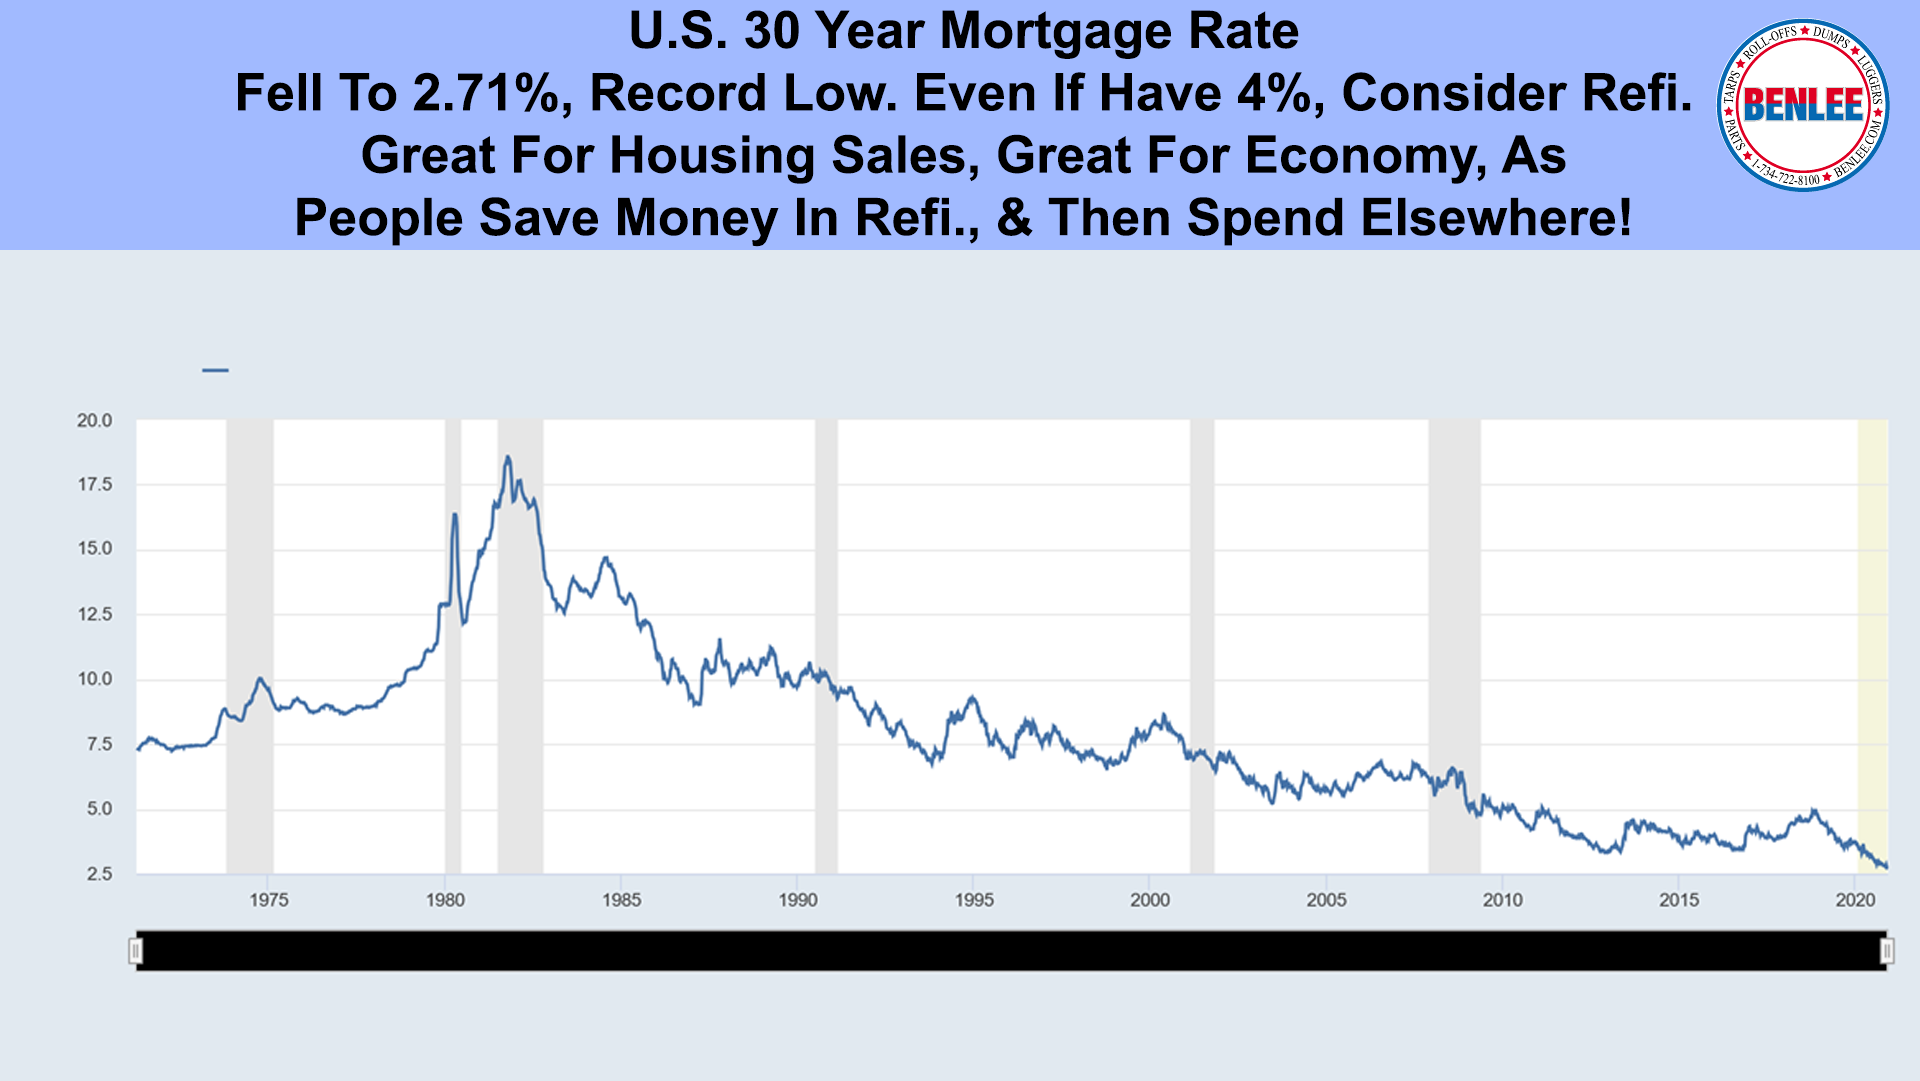 U.S. 30 Year Mortgage Rate